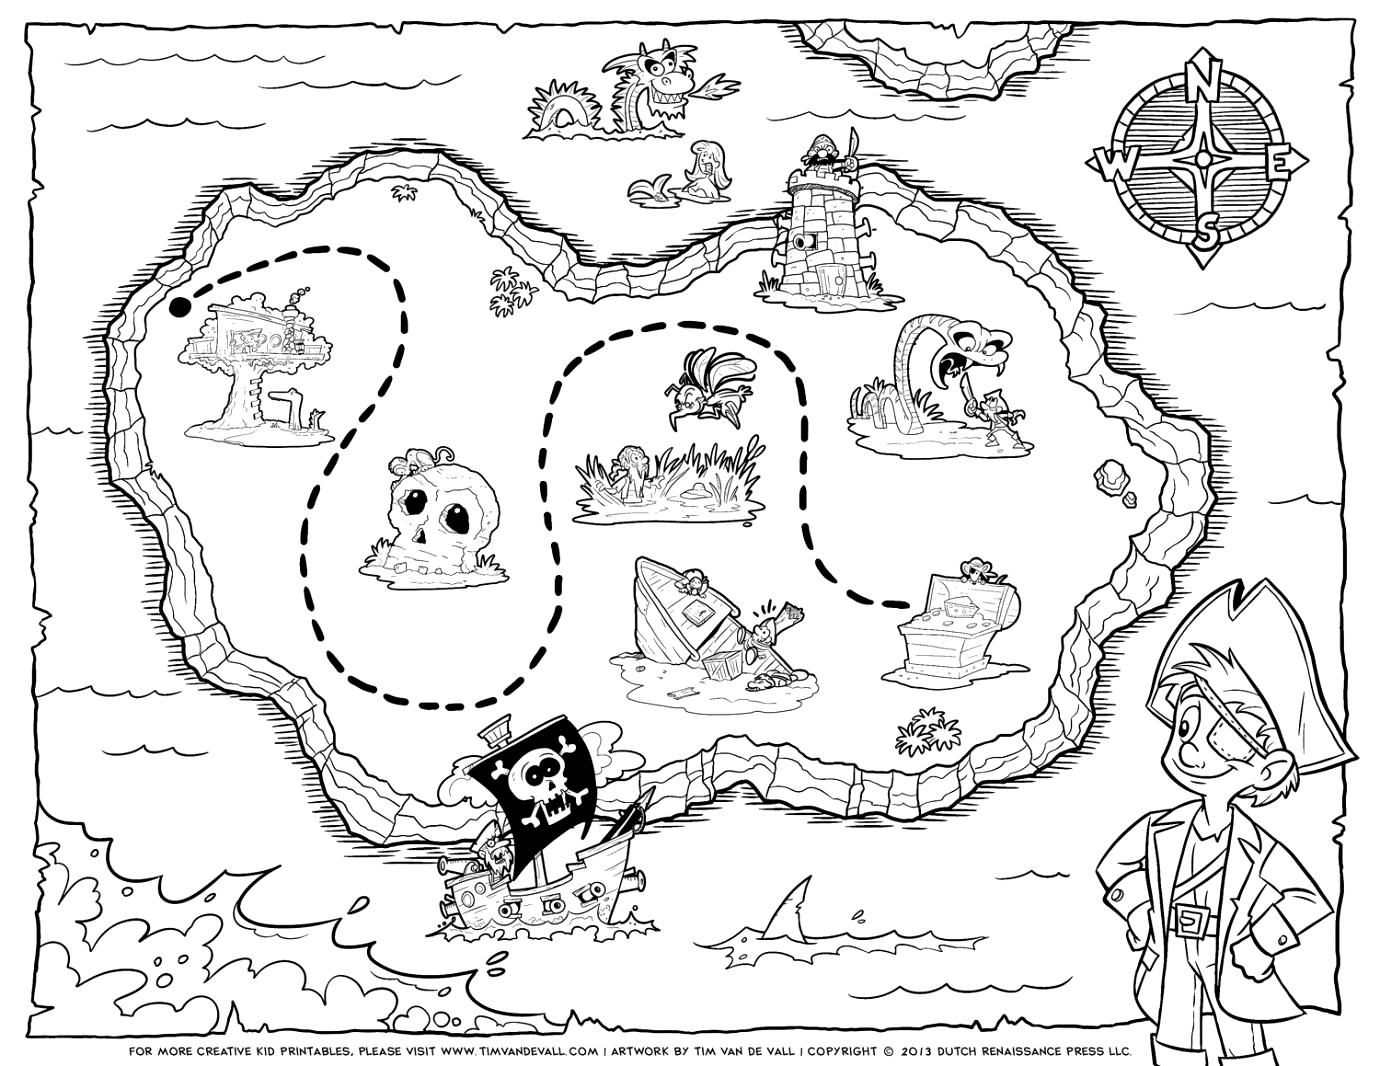 Pirate treasure map coloring pages free printable earth black and